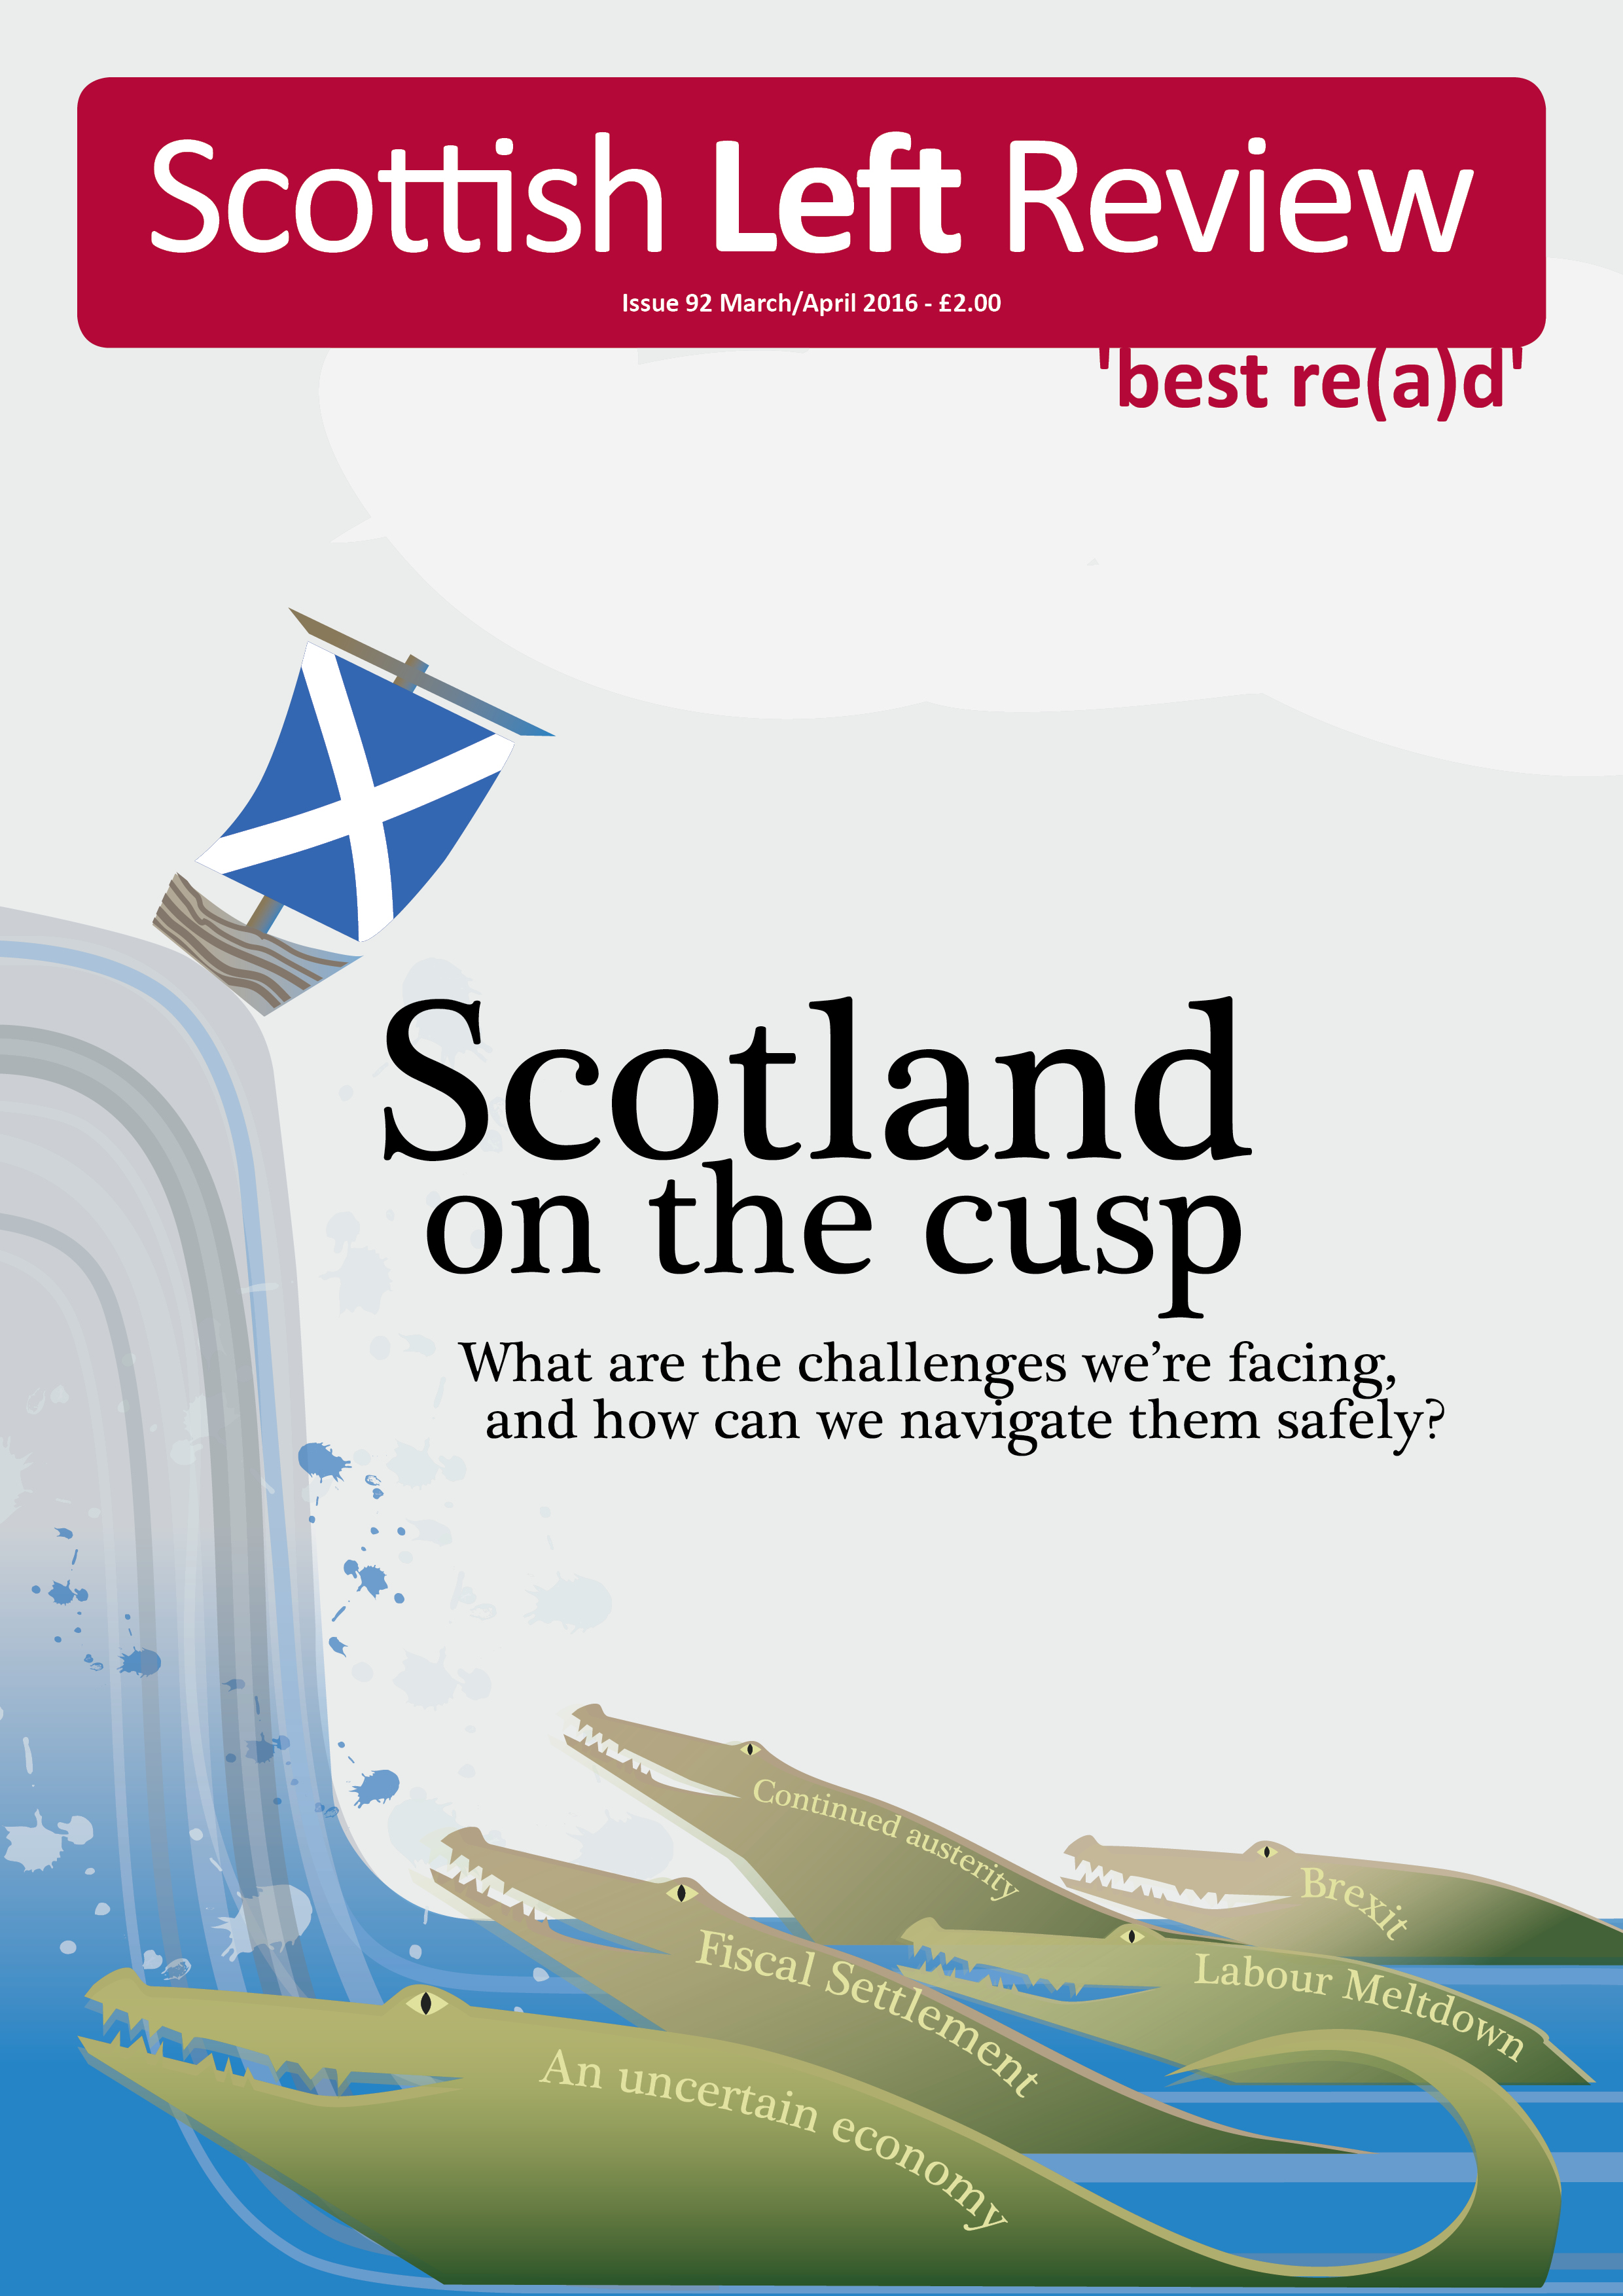 Scottish Left Review Issue 92 Mar/Apr 2016